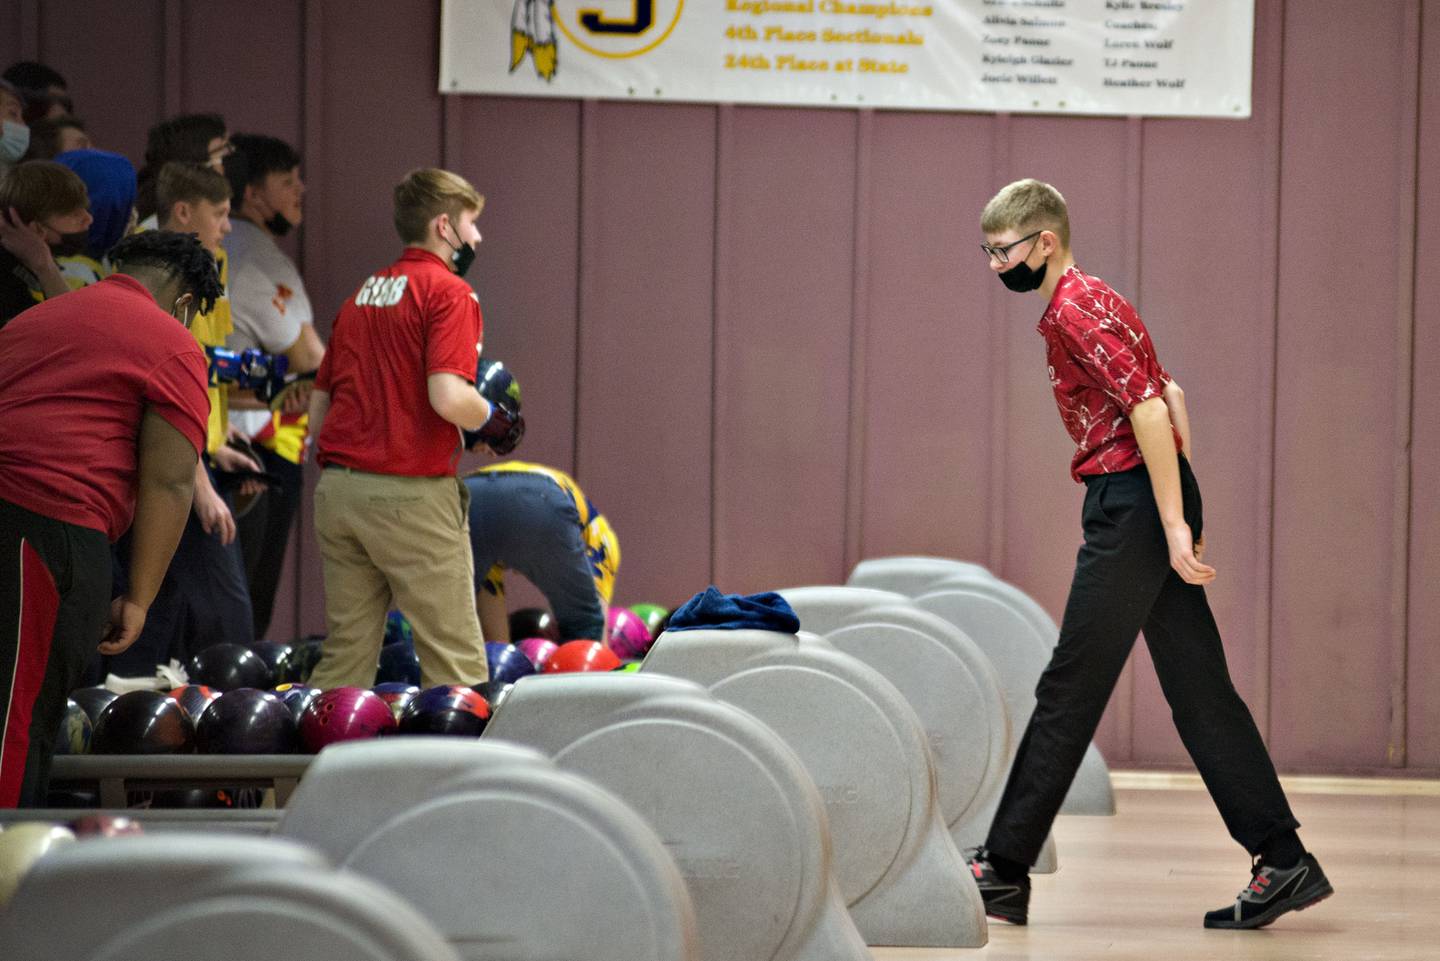 Oregon's Isaac Kaltenbrun celebrates a strike during bowling regionals in Sterling on Saturday, Jan. 15, 2022.